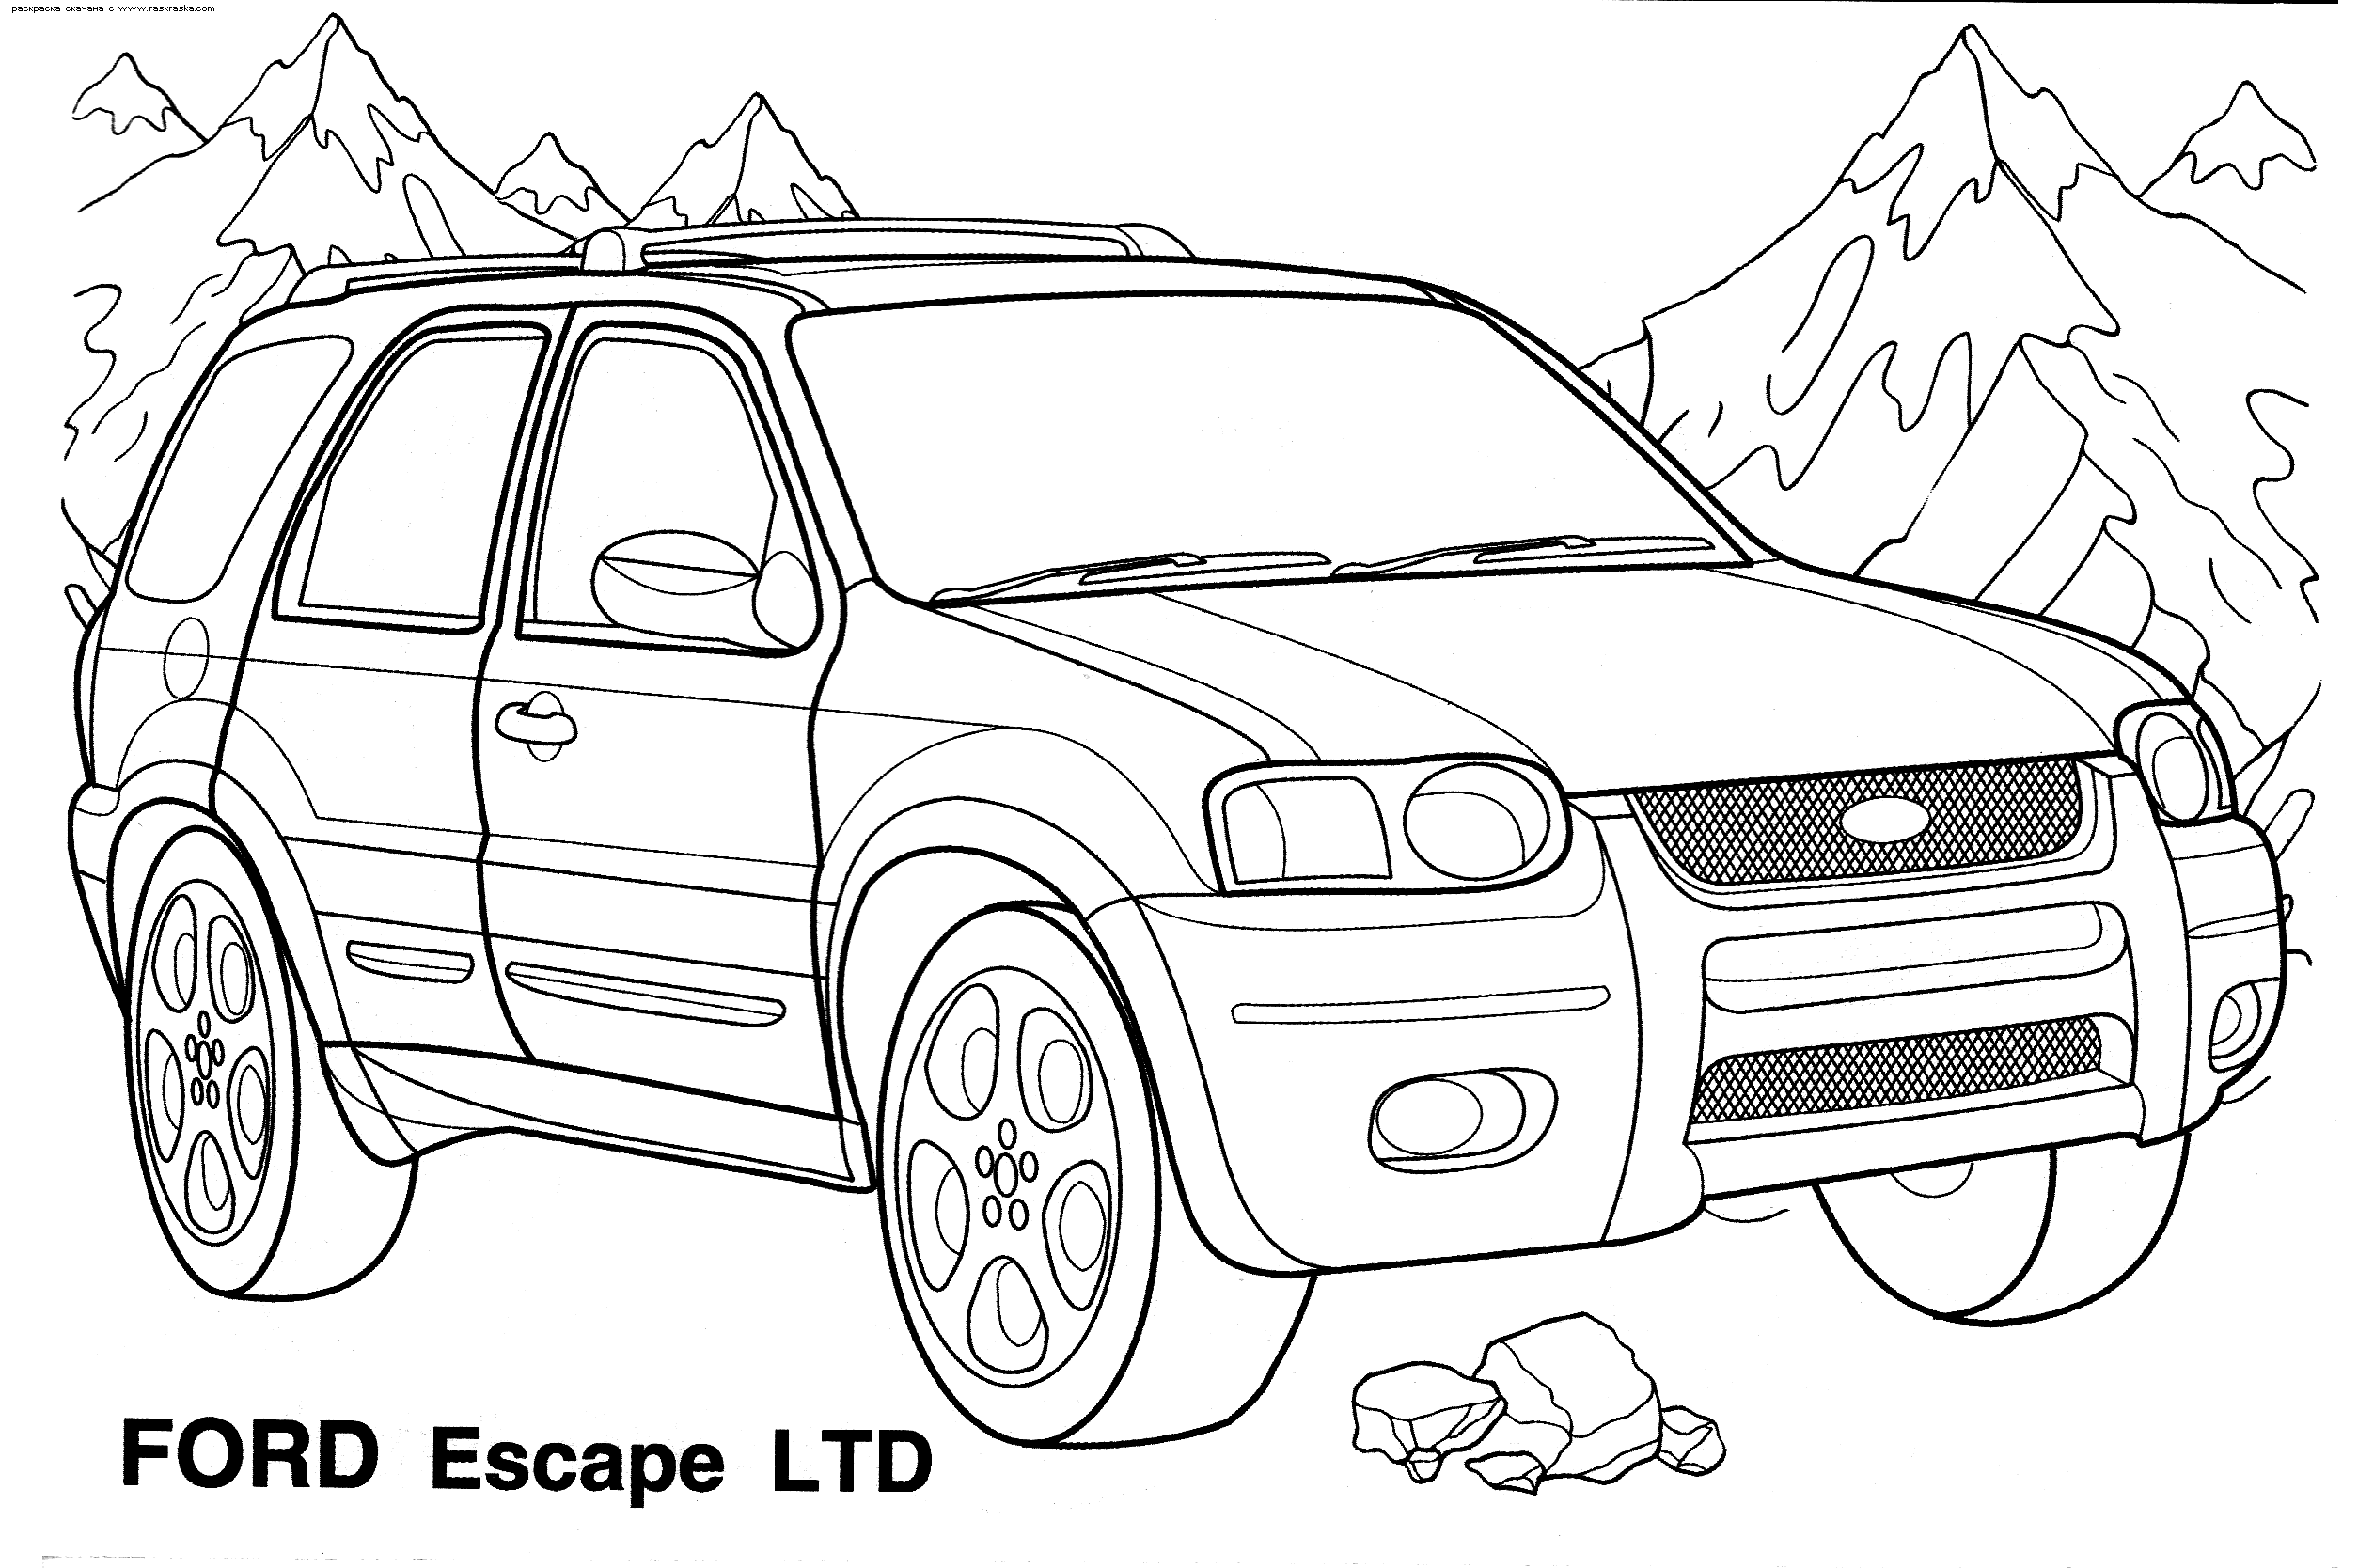 Car Coloring Pages - Coloring Kids